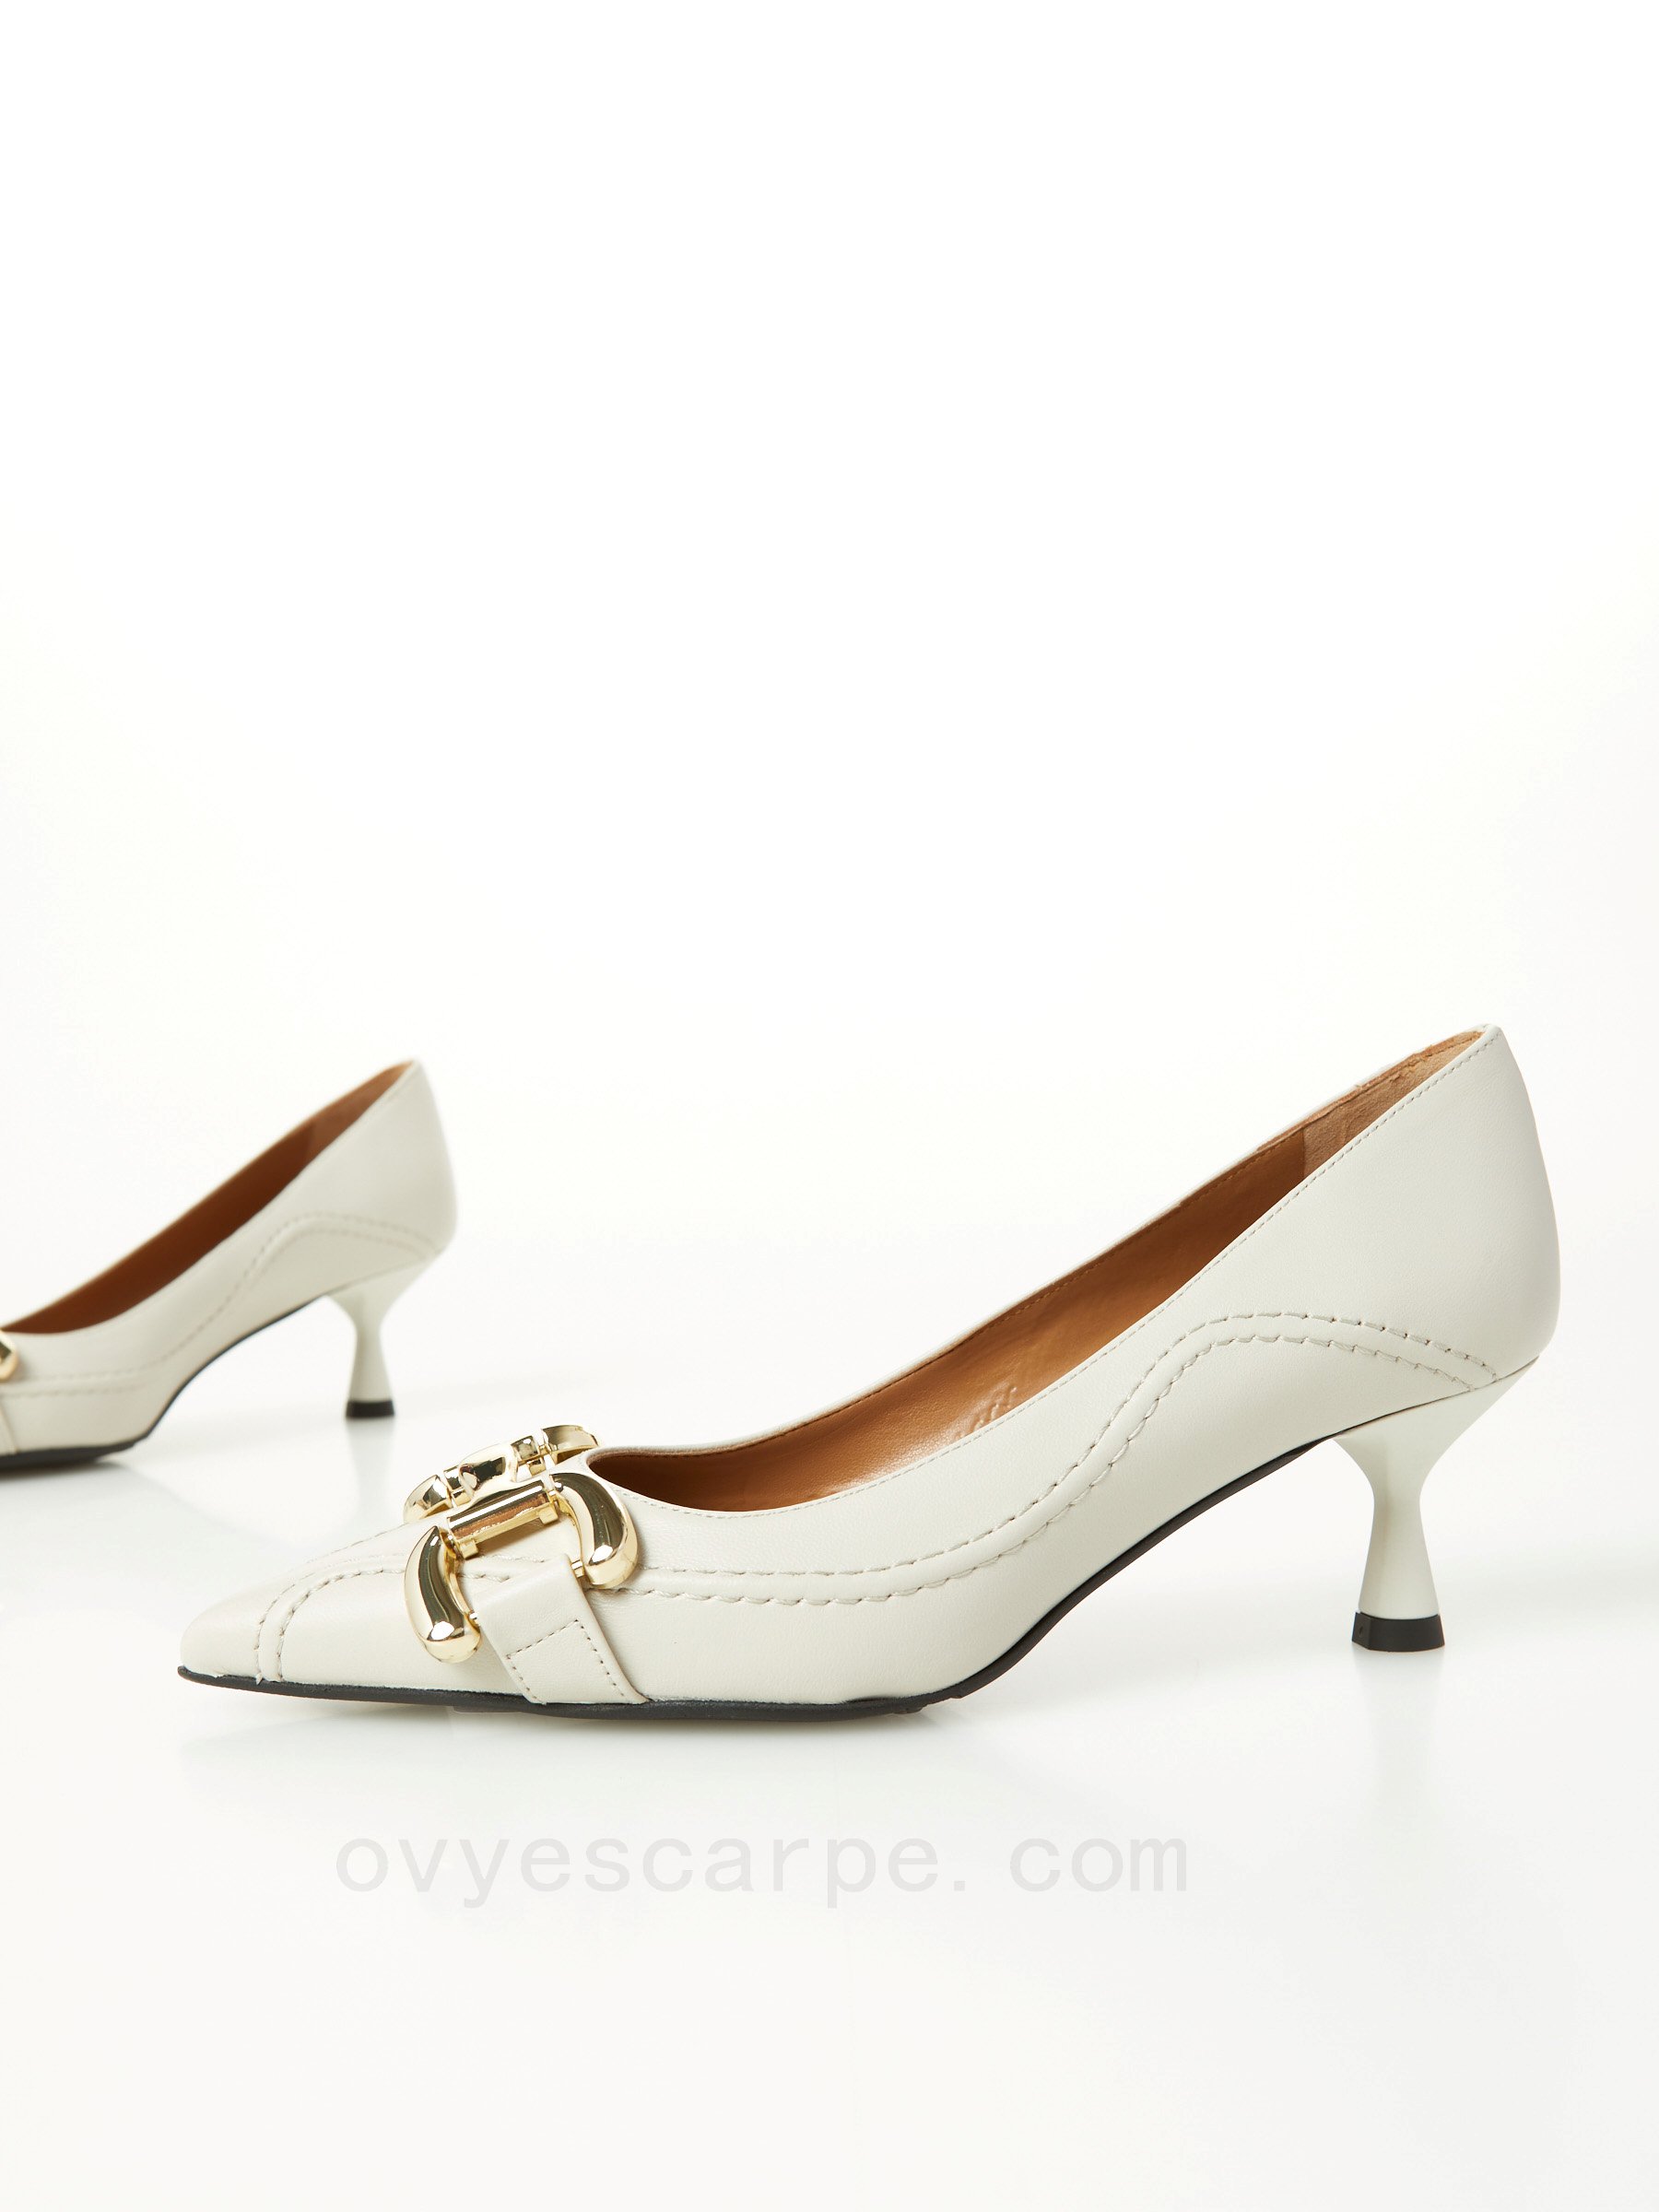 scarpe ovy&#232; outlet Leather Pump F08161027-0605